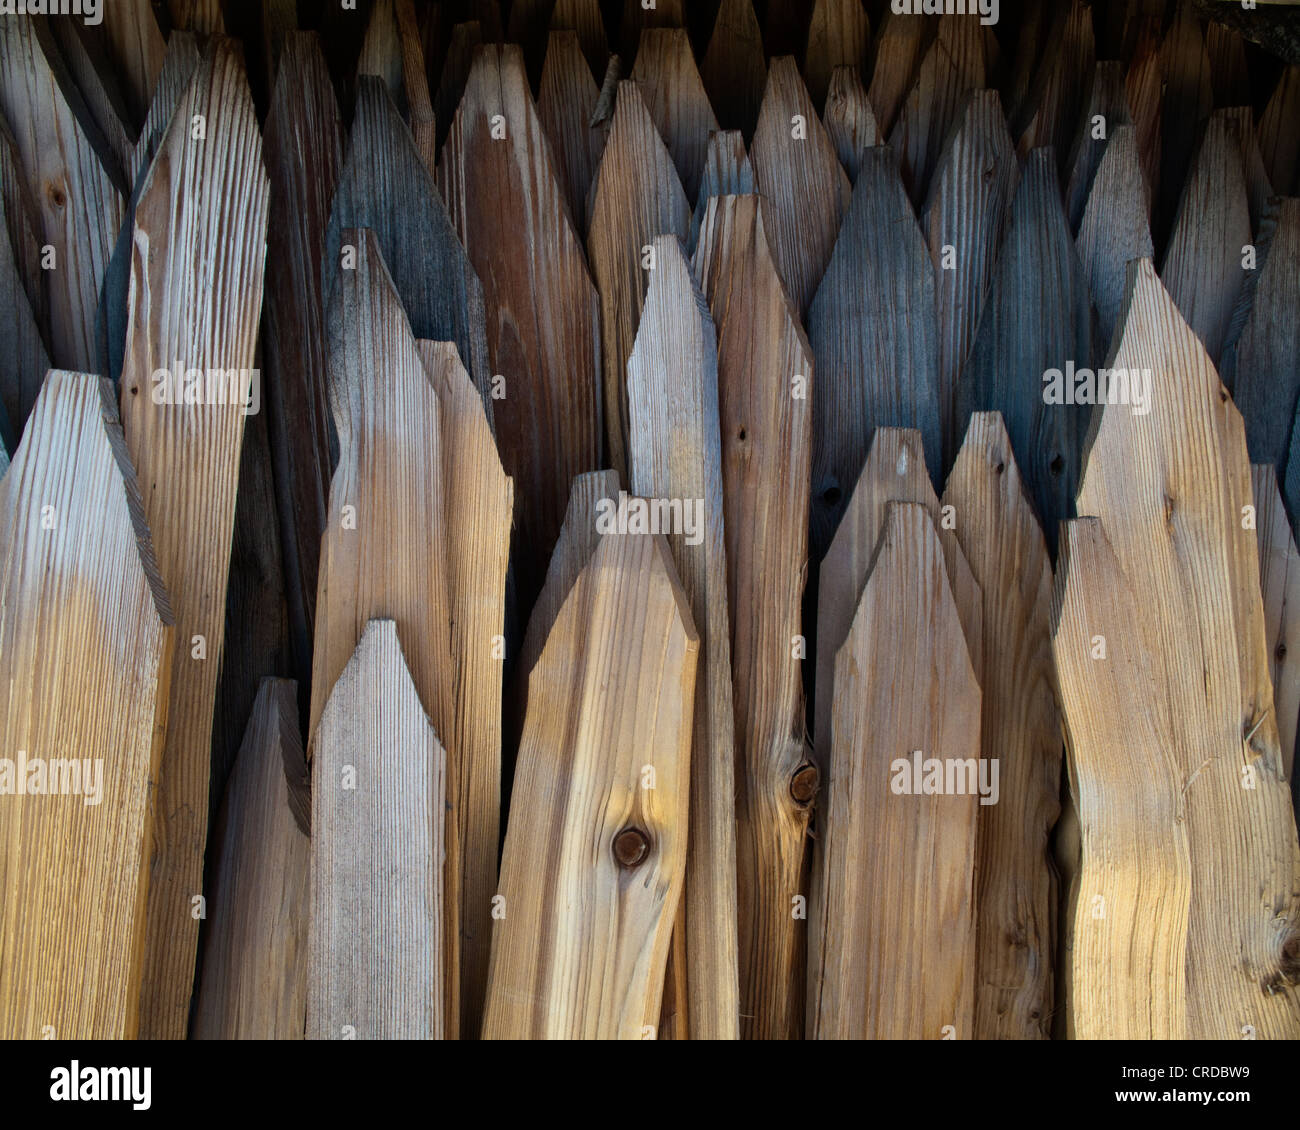 PHOTO ART: Traditional wooden fence palings Stock Photo